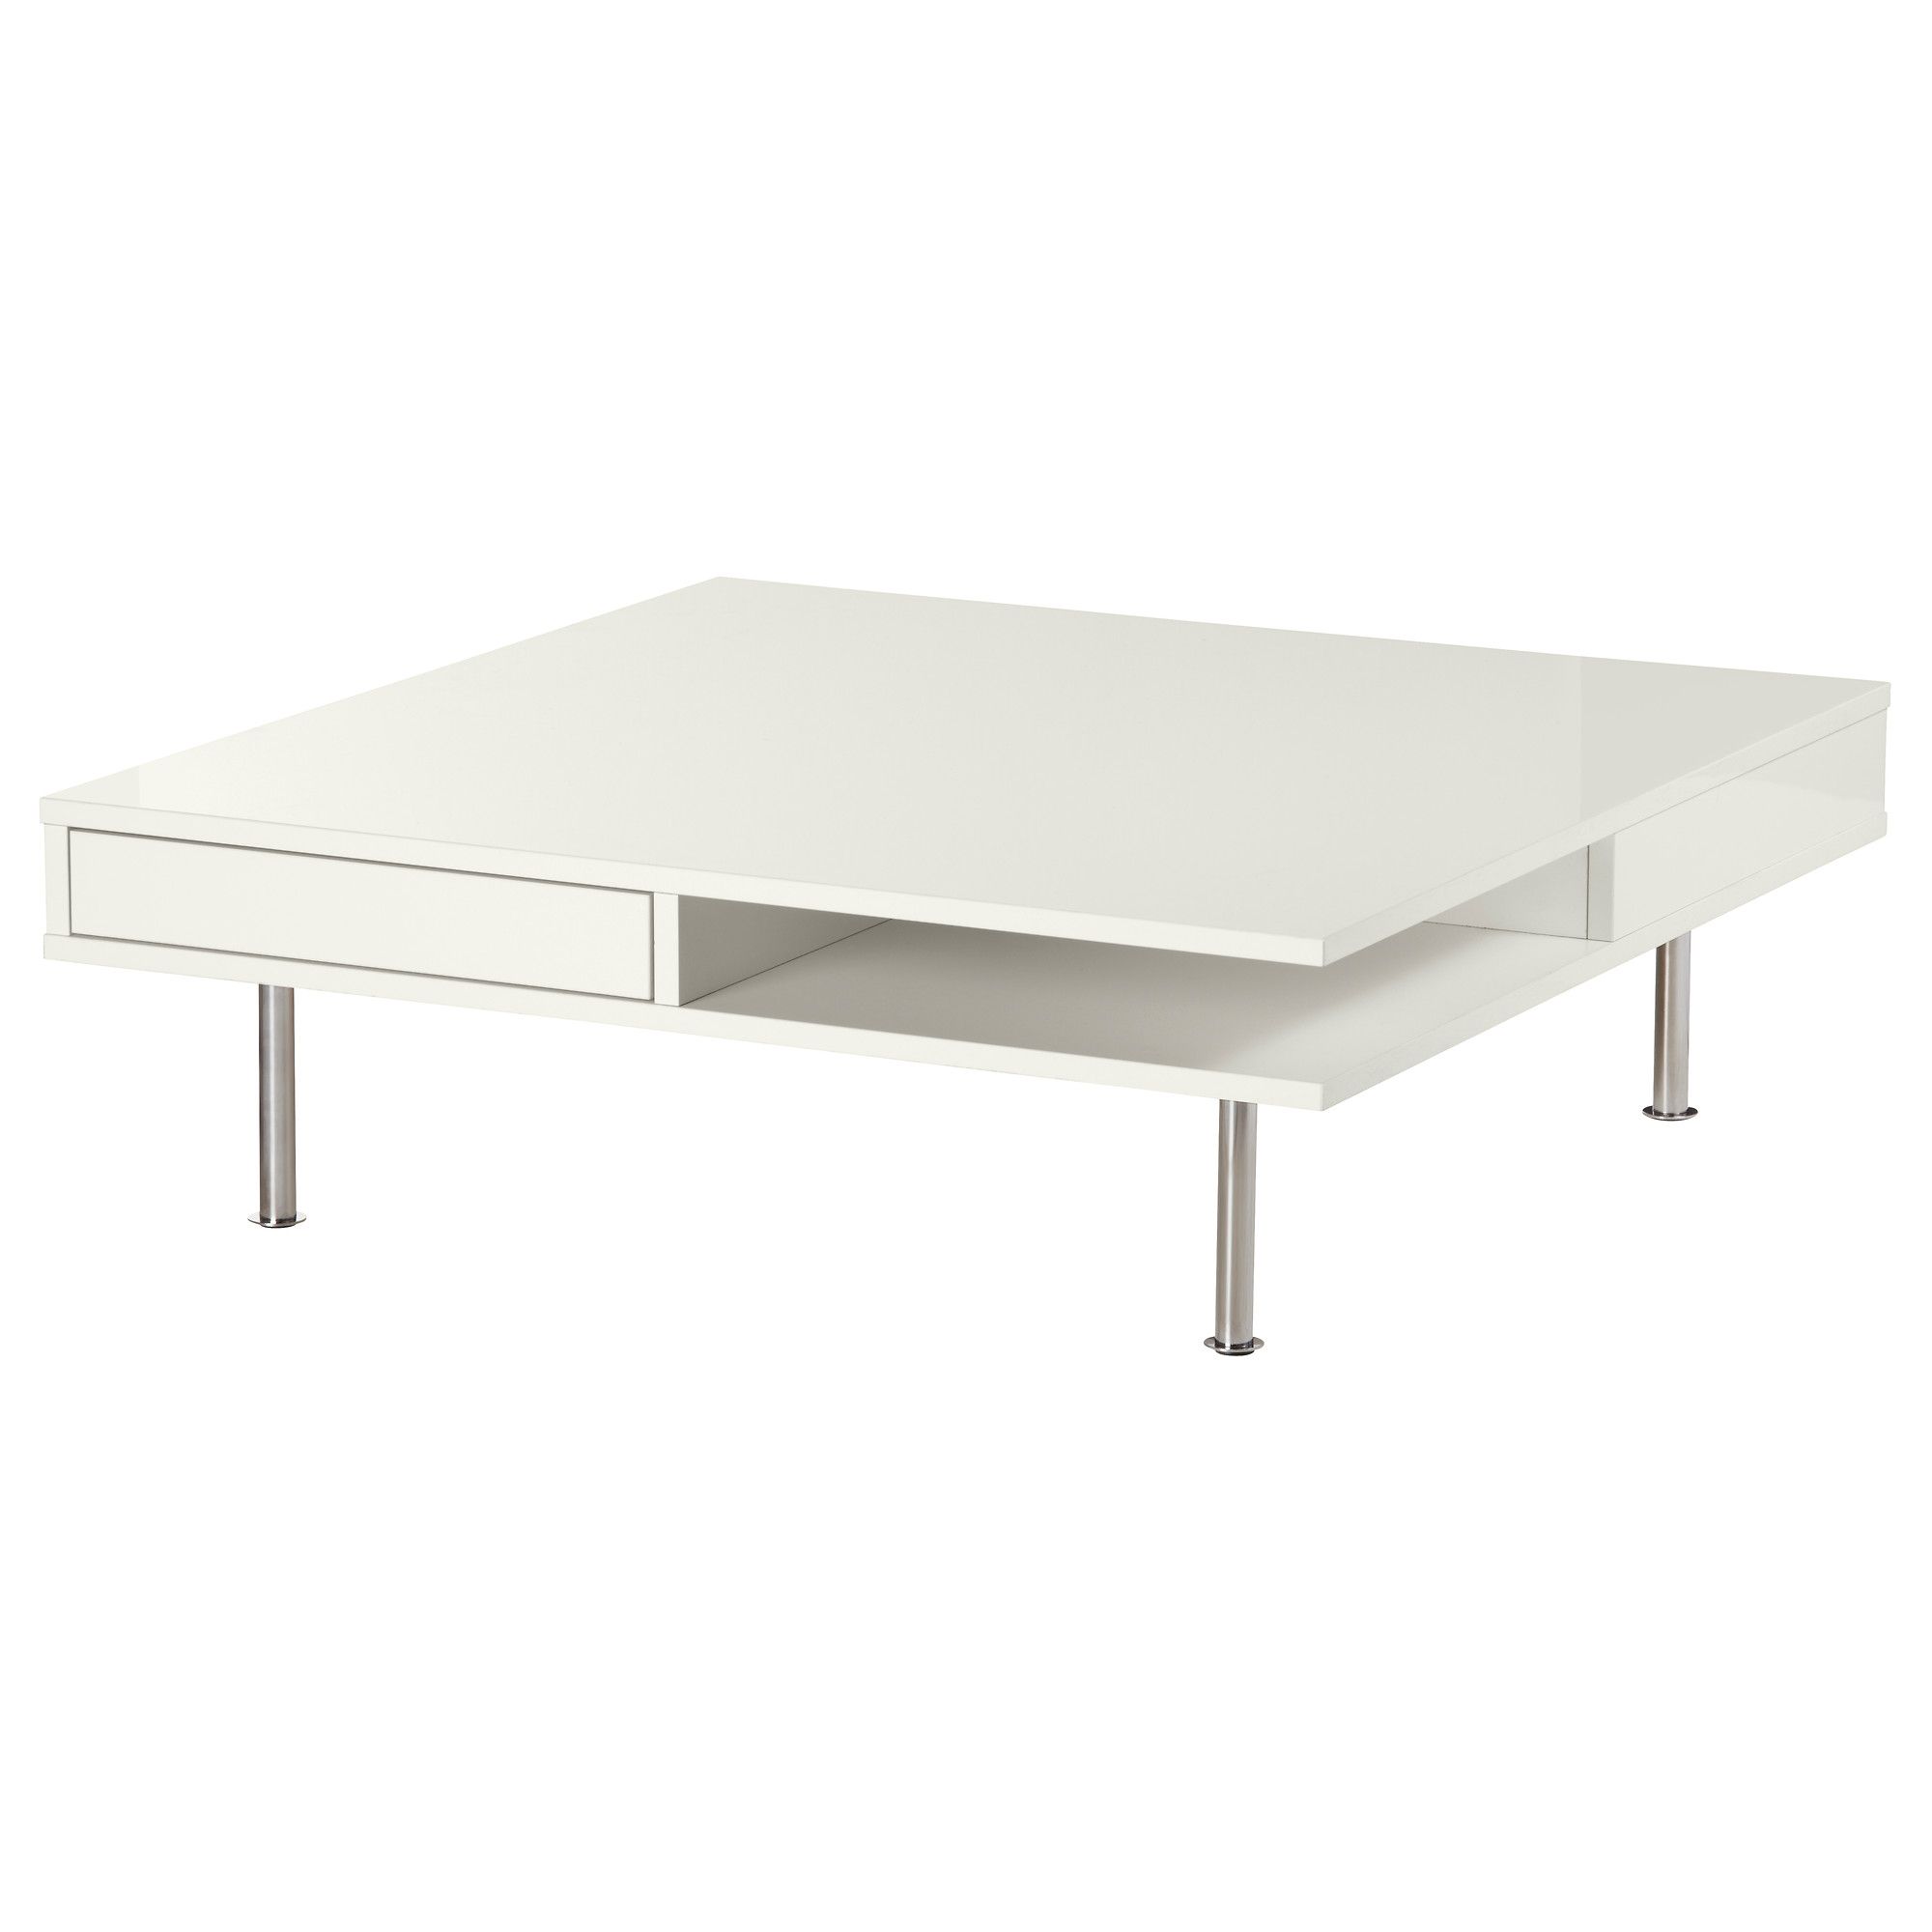 Tofteryd Coffee Table High Gloss White 95x95 Cm | Ikea Lietuva Throughout High Gloss Coffee Tables (View 4 of 20)